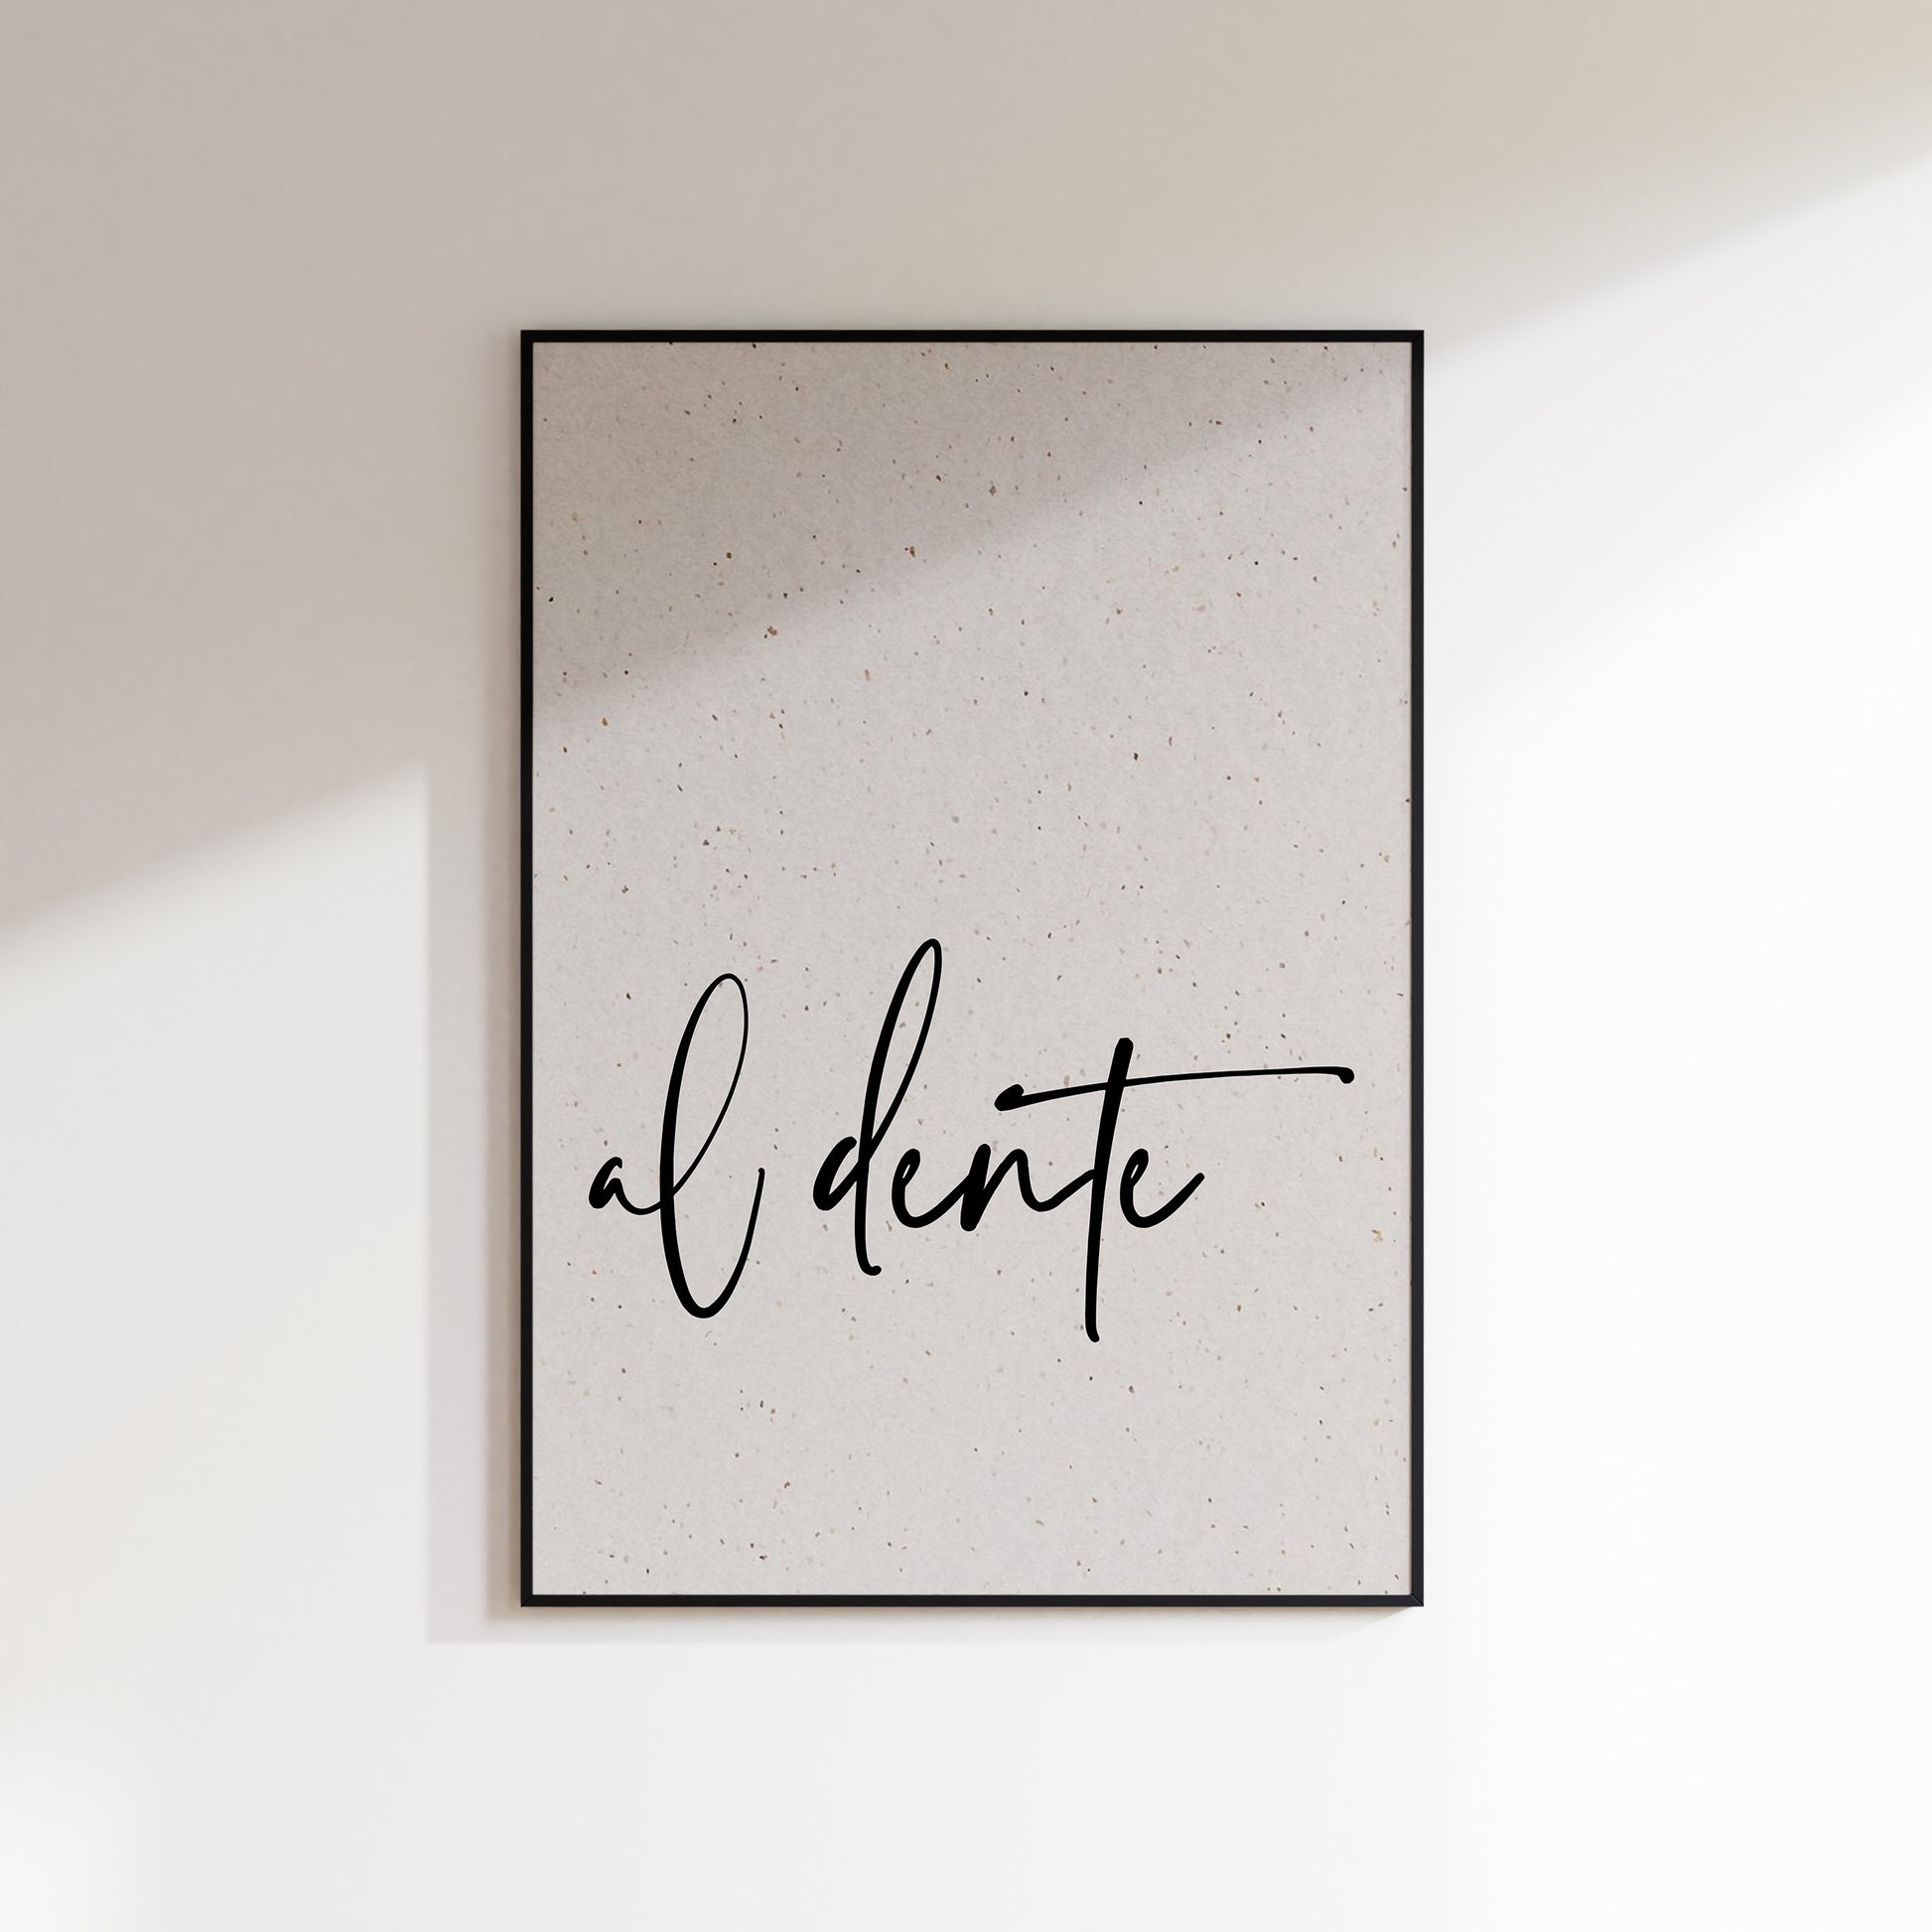 A print on textured paper with black text that reads 'al dente' in a handwriting style typeface. A culinary print for the kitchen. Print is in a black frame on a white wall background.